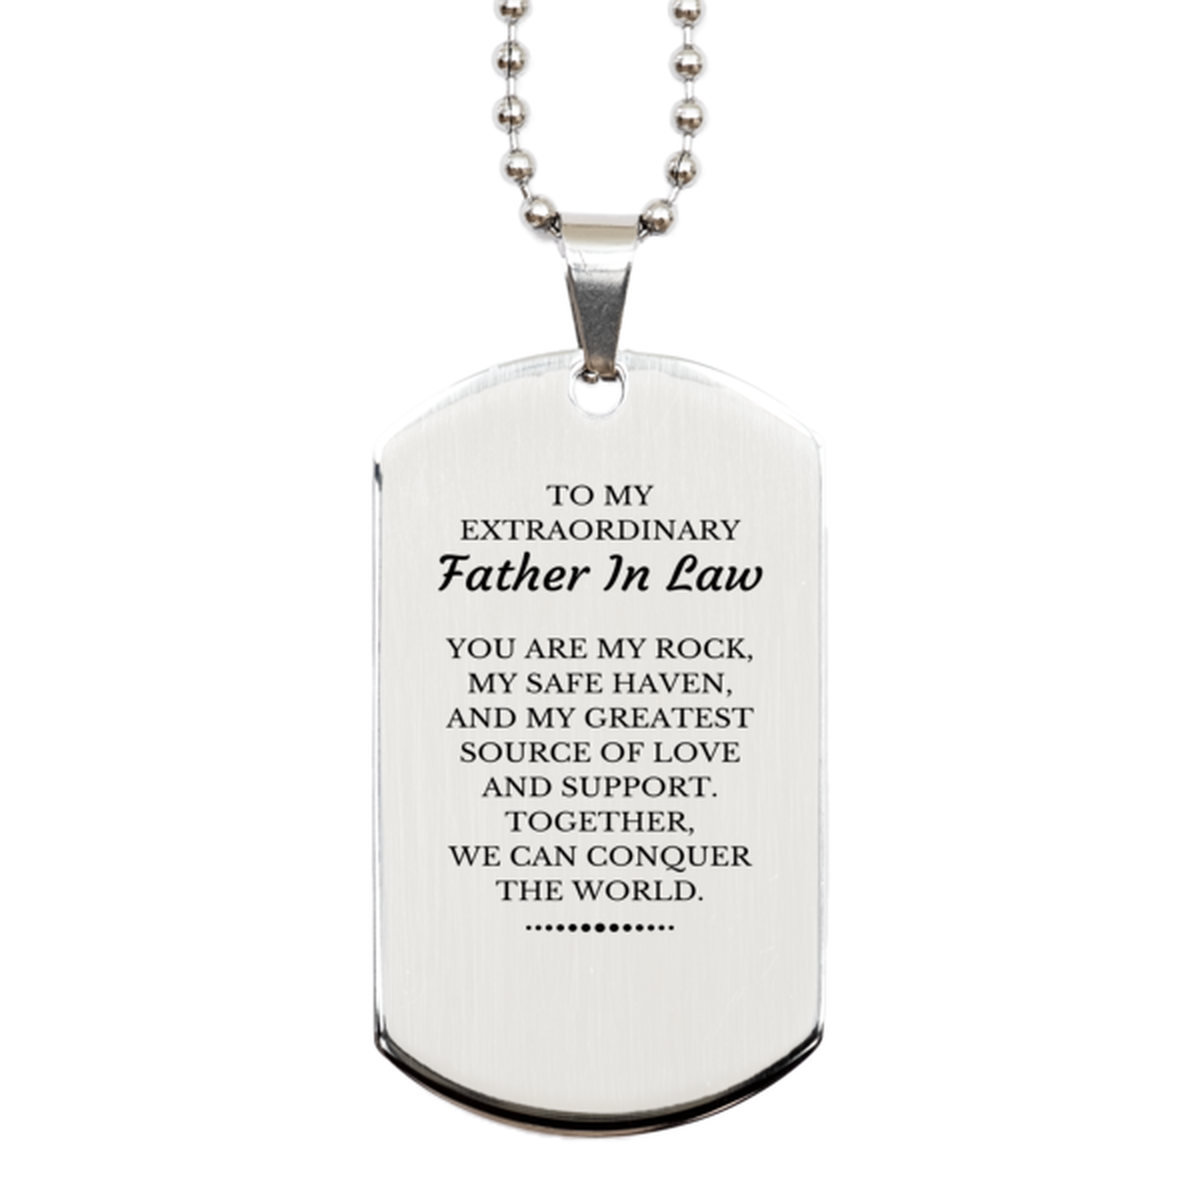 To My Extraordinary Father In Law Gifts, Together, we can conquer the world, Birthday Silver Dog Tag For Father In Law, Christmas Gifts For Father In Law